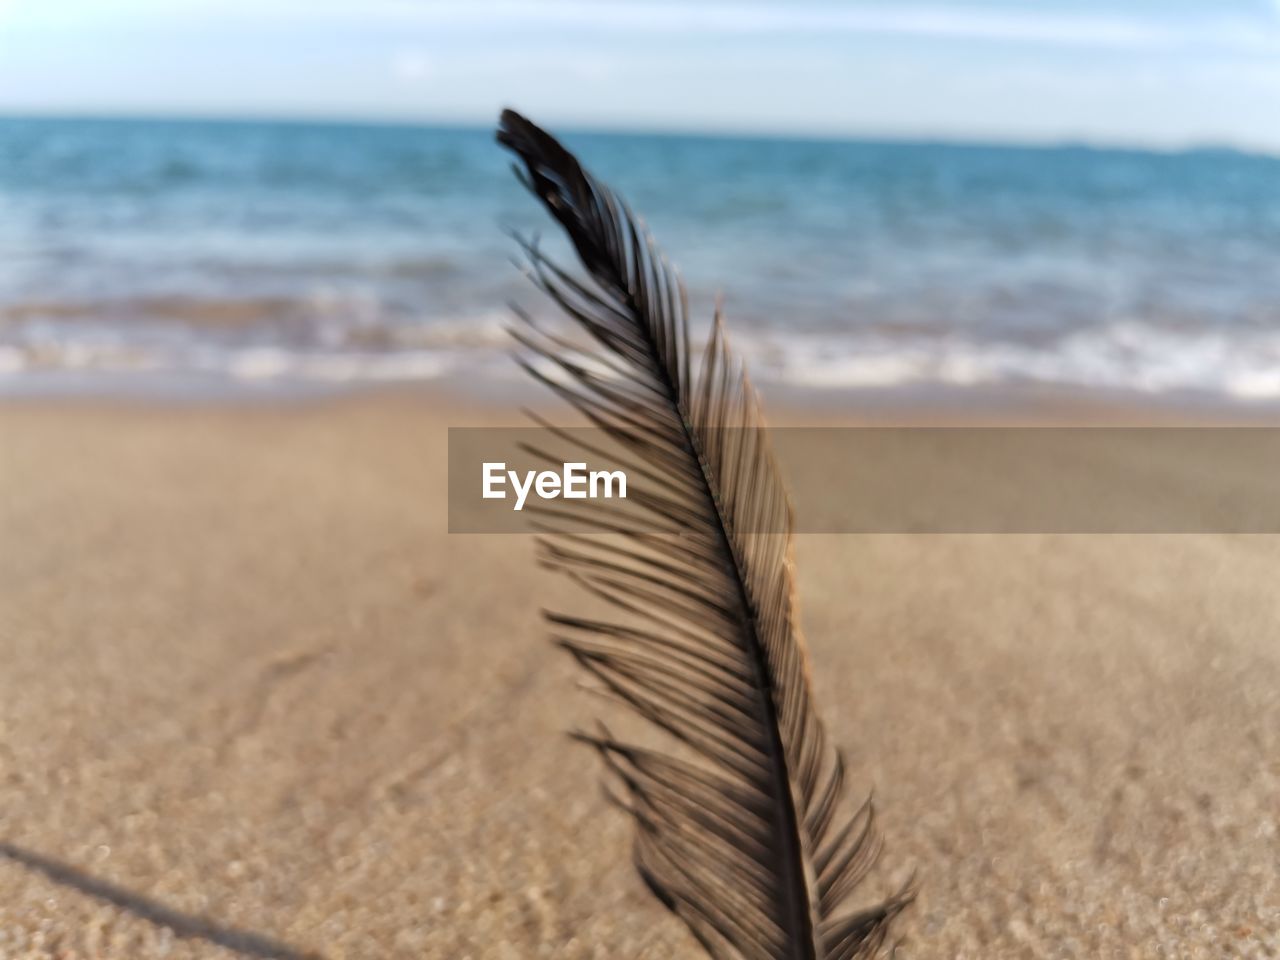 CLOSE-UP OF FEATHER ON SAND